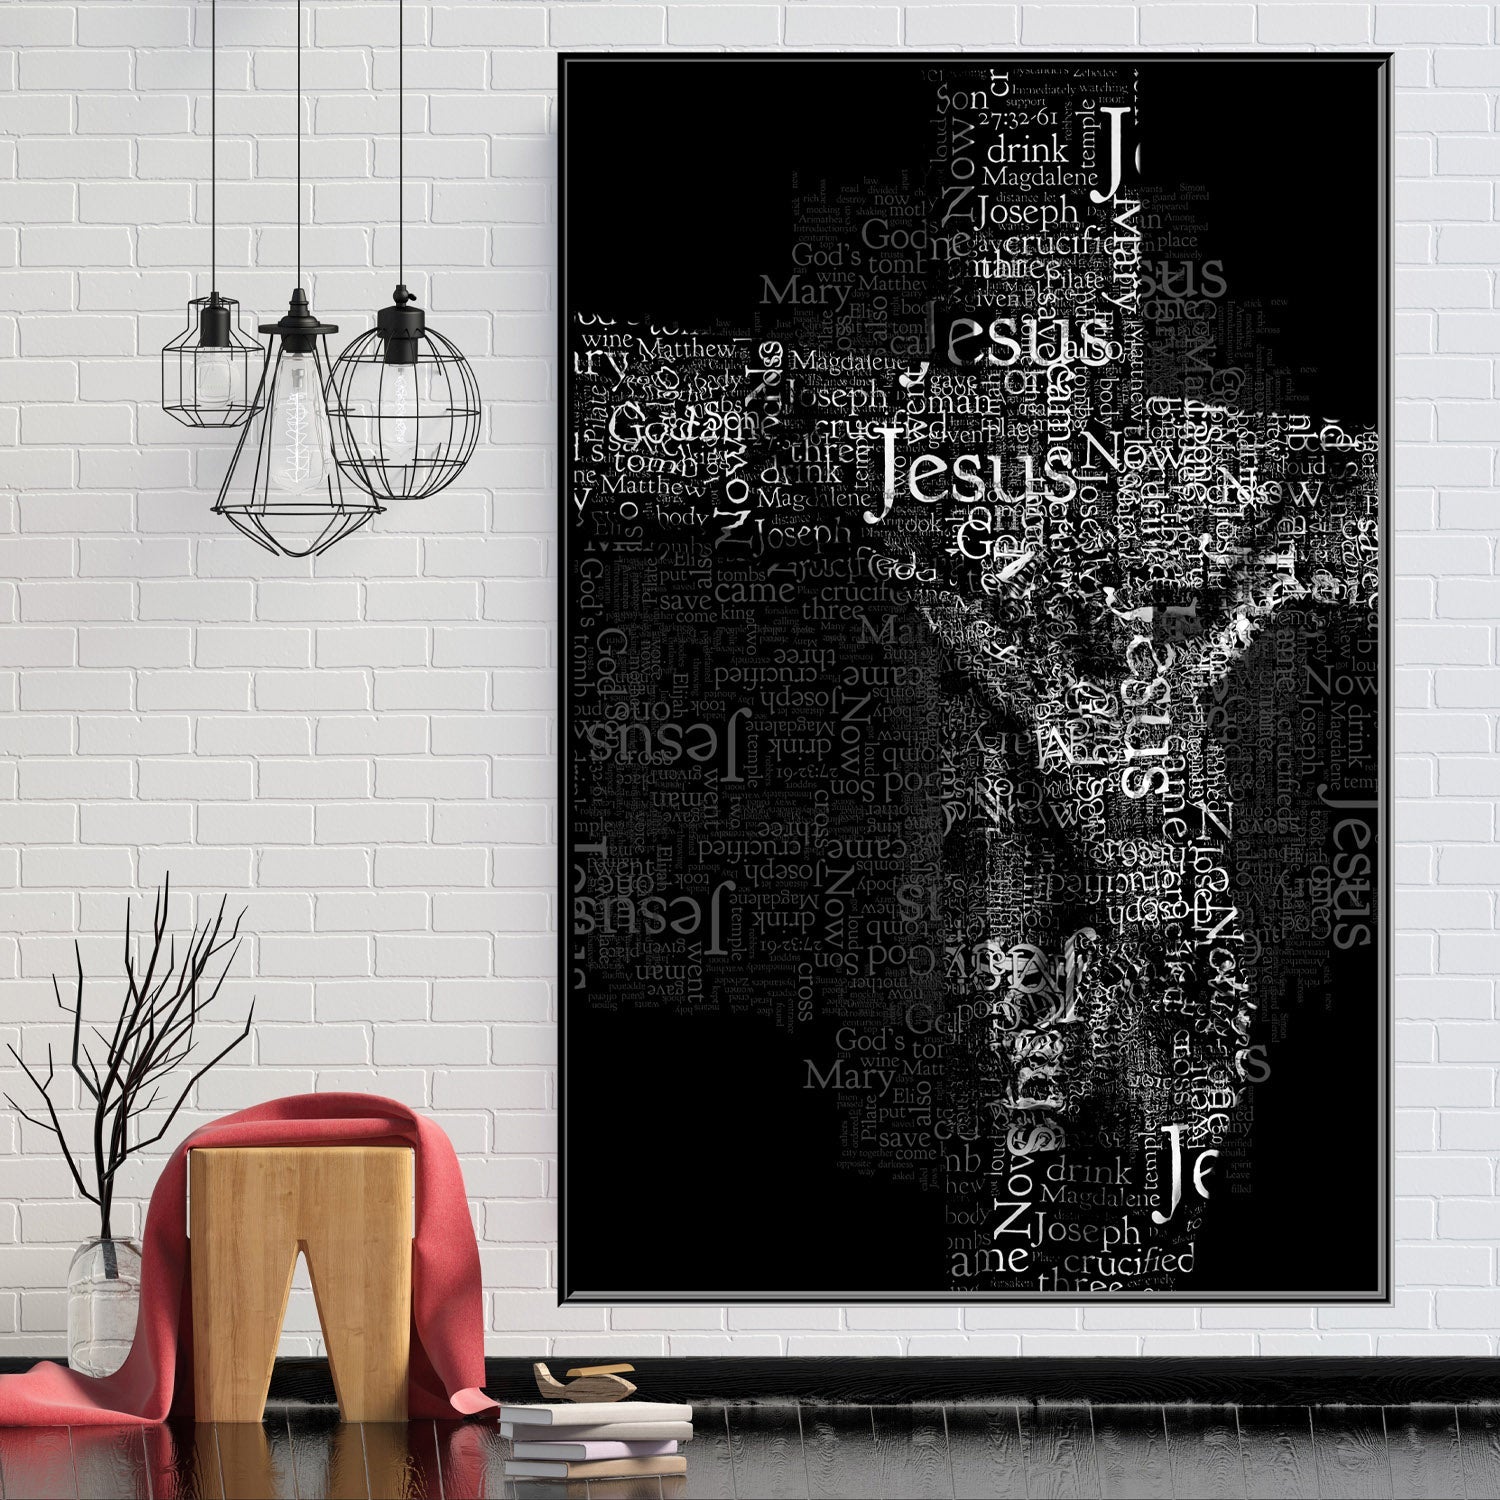 https://cdn.shopify.com/s/files/1/0387/9986/8044/products/JesusTextCollageCanvasArtprintStretched-4.jpg